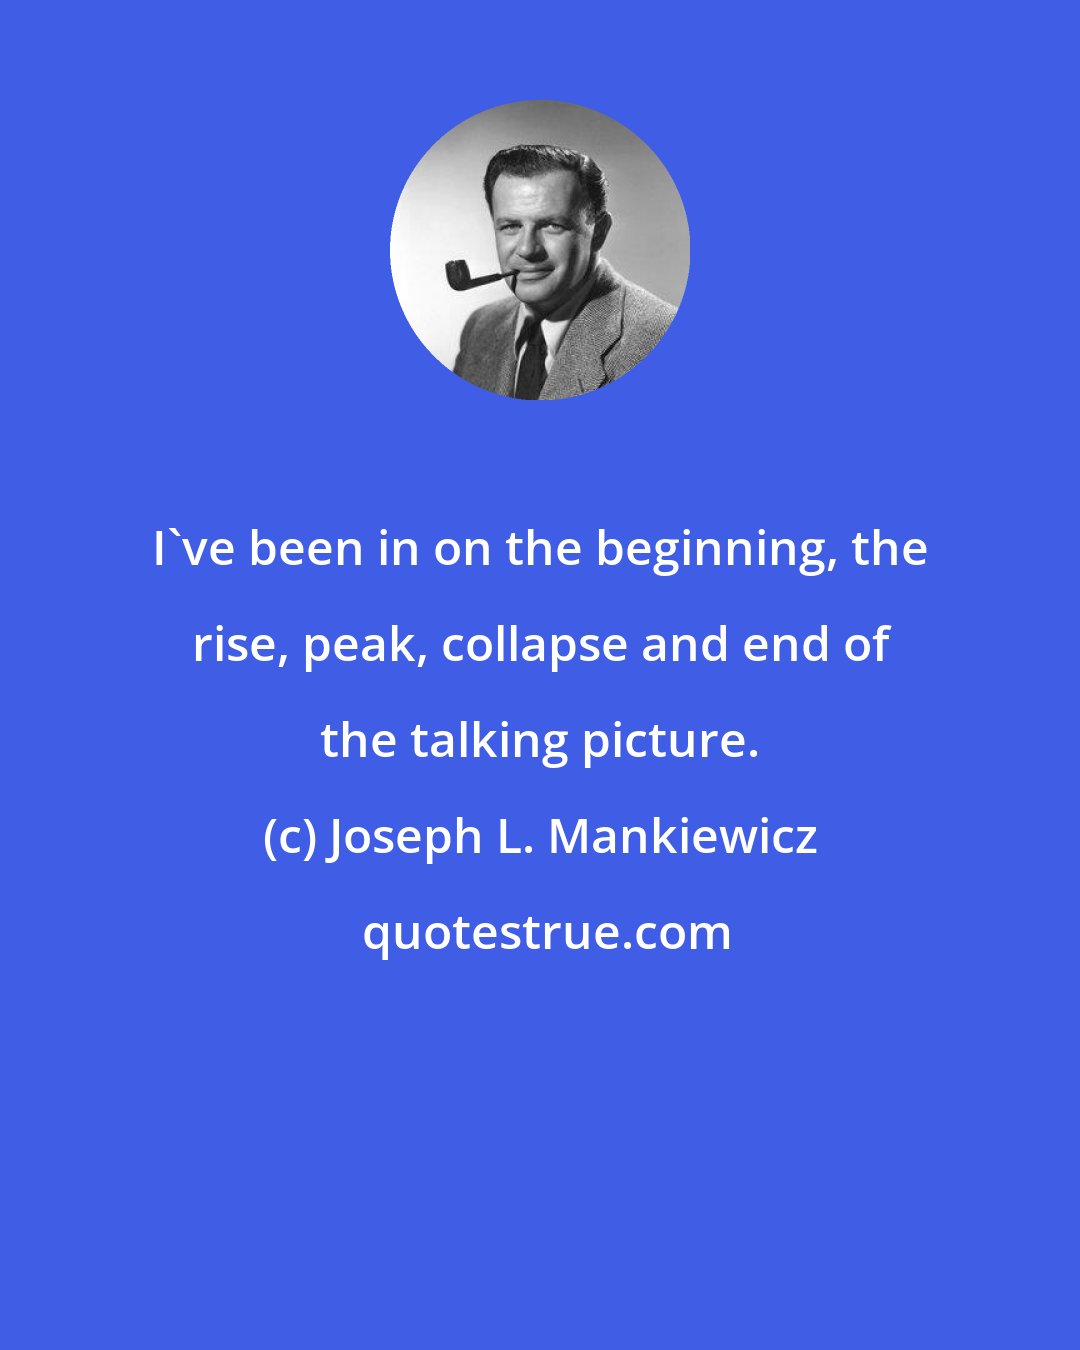 Joseph L. Mankiewicz: I've been in on the beginning, the rise, peak, collapse and end of the talking picture.